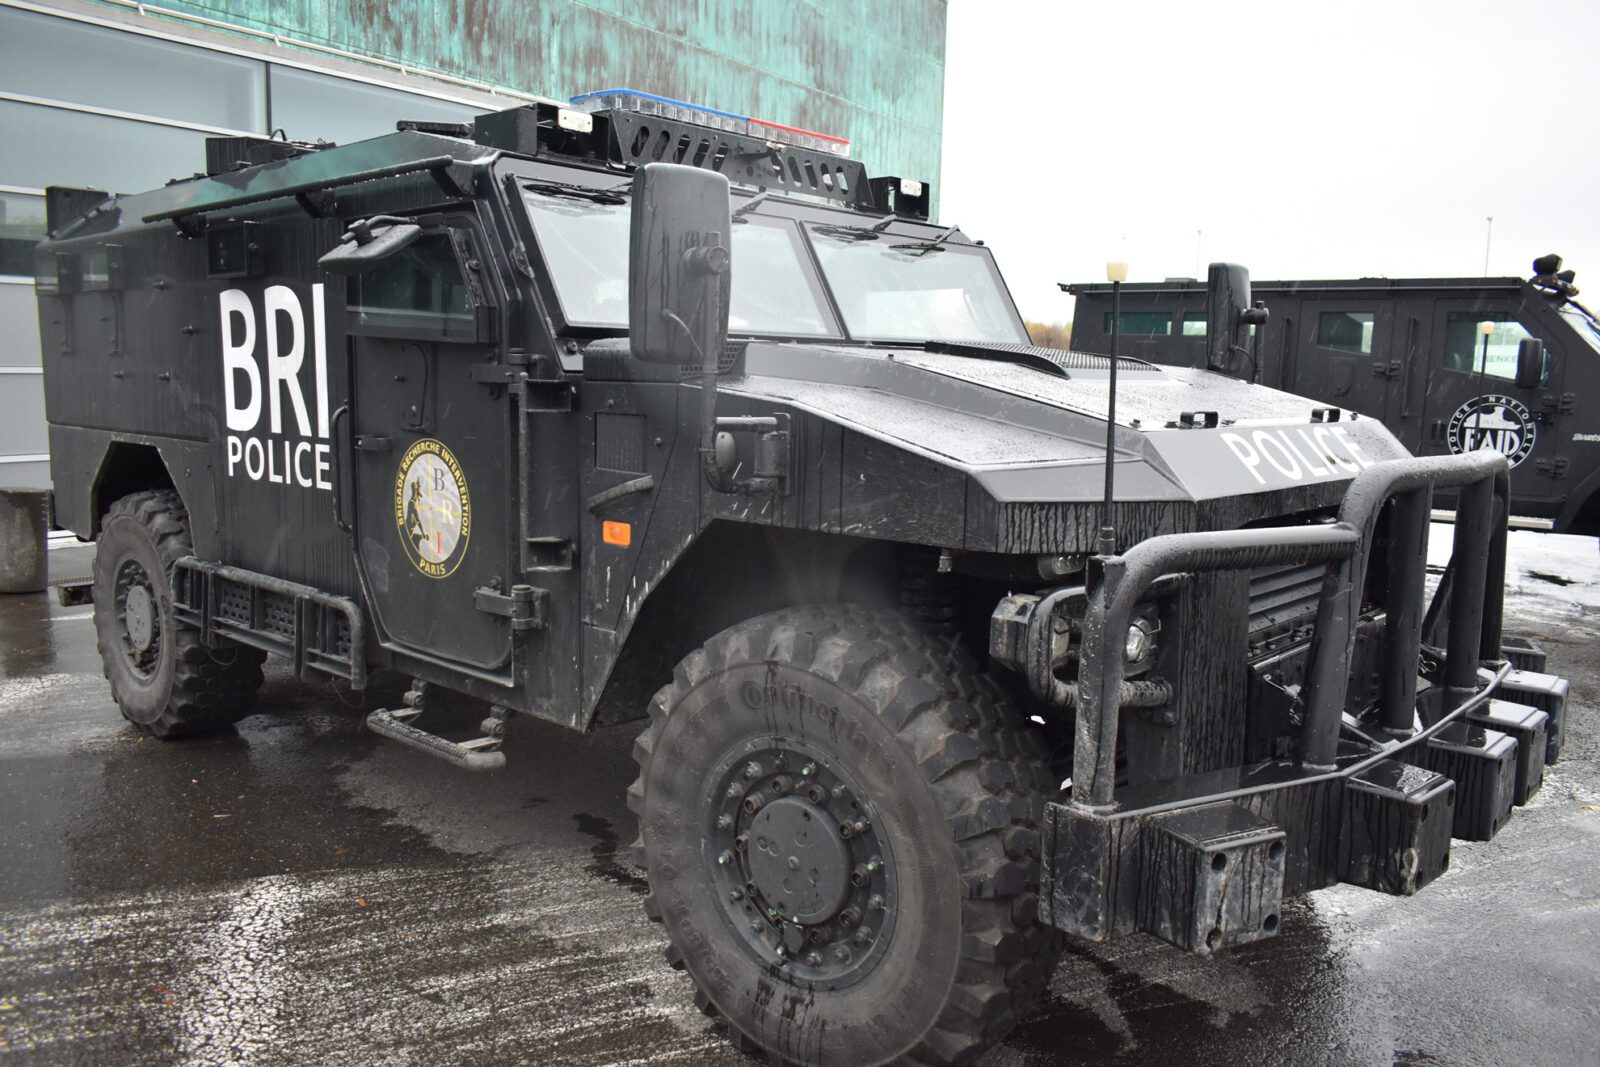 The SHERPA APC Police showcased by the Brigade for Research and Intervention (BRI)at Milipol Paris 2023